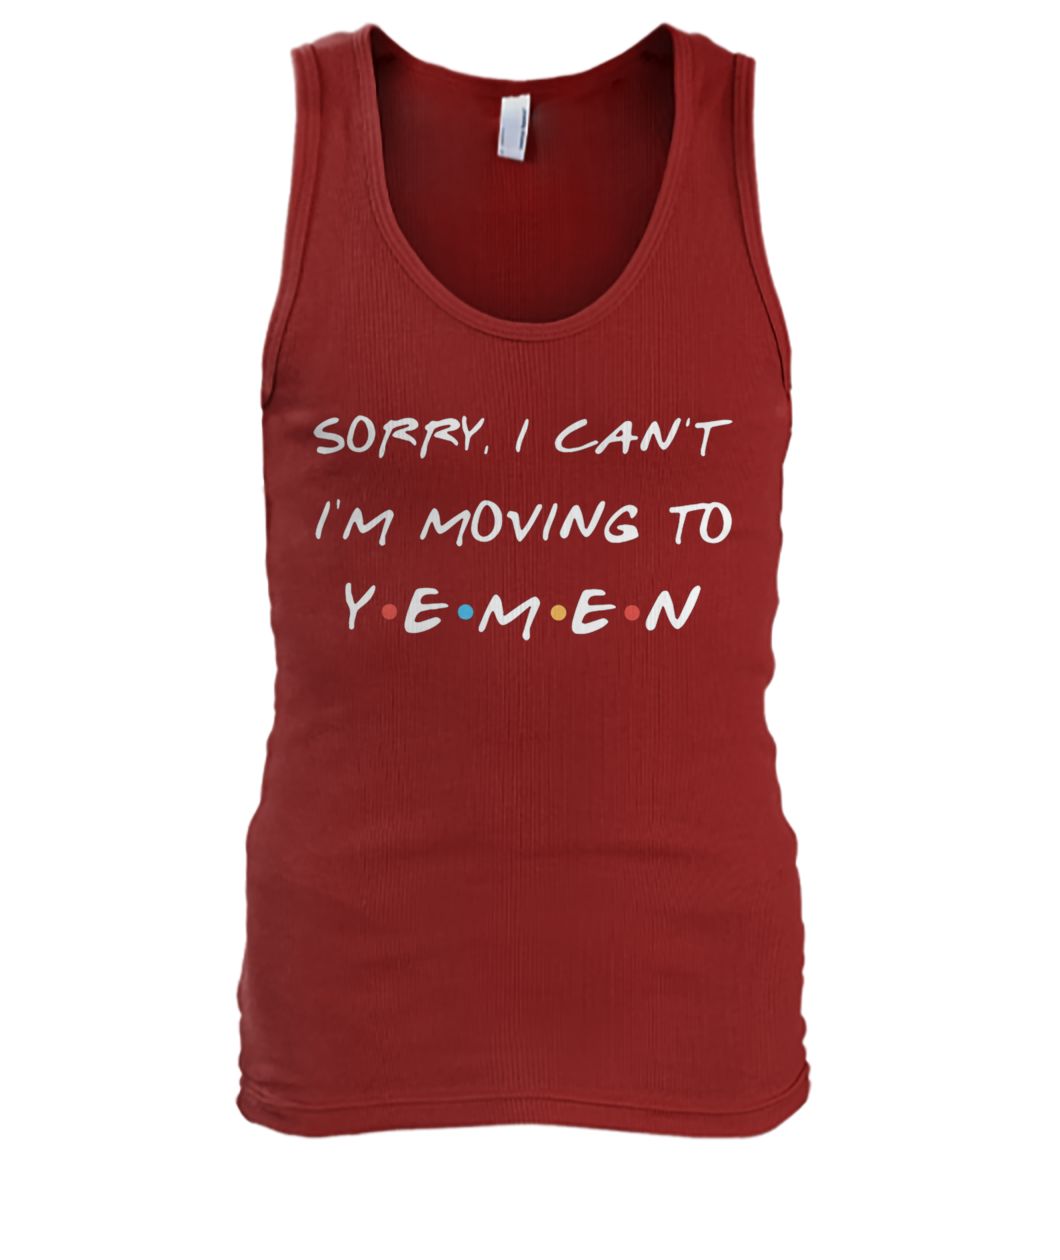 Friends tv show sorry I can't I'm moving to yemen men's tank top